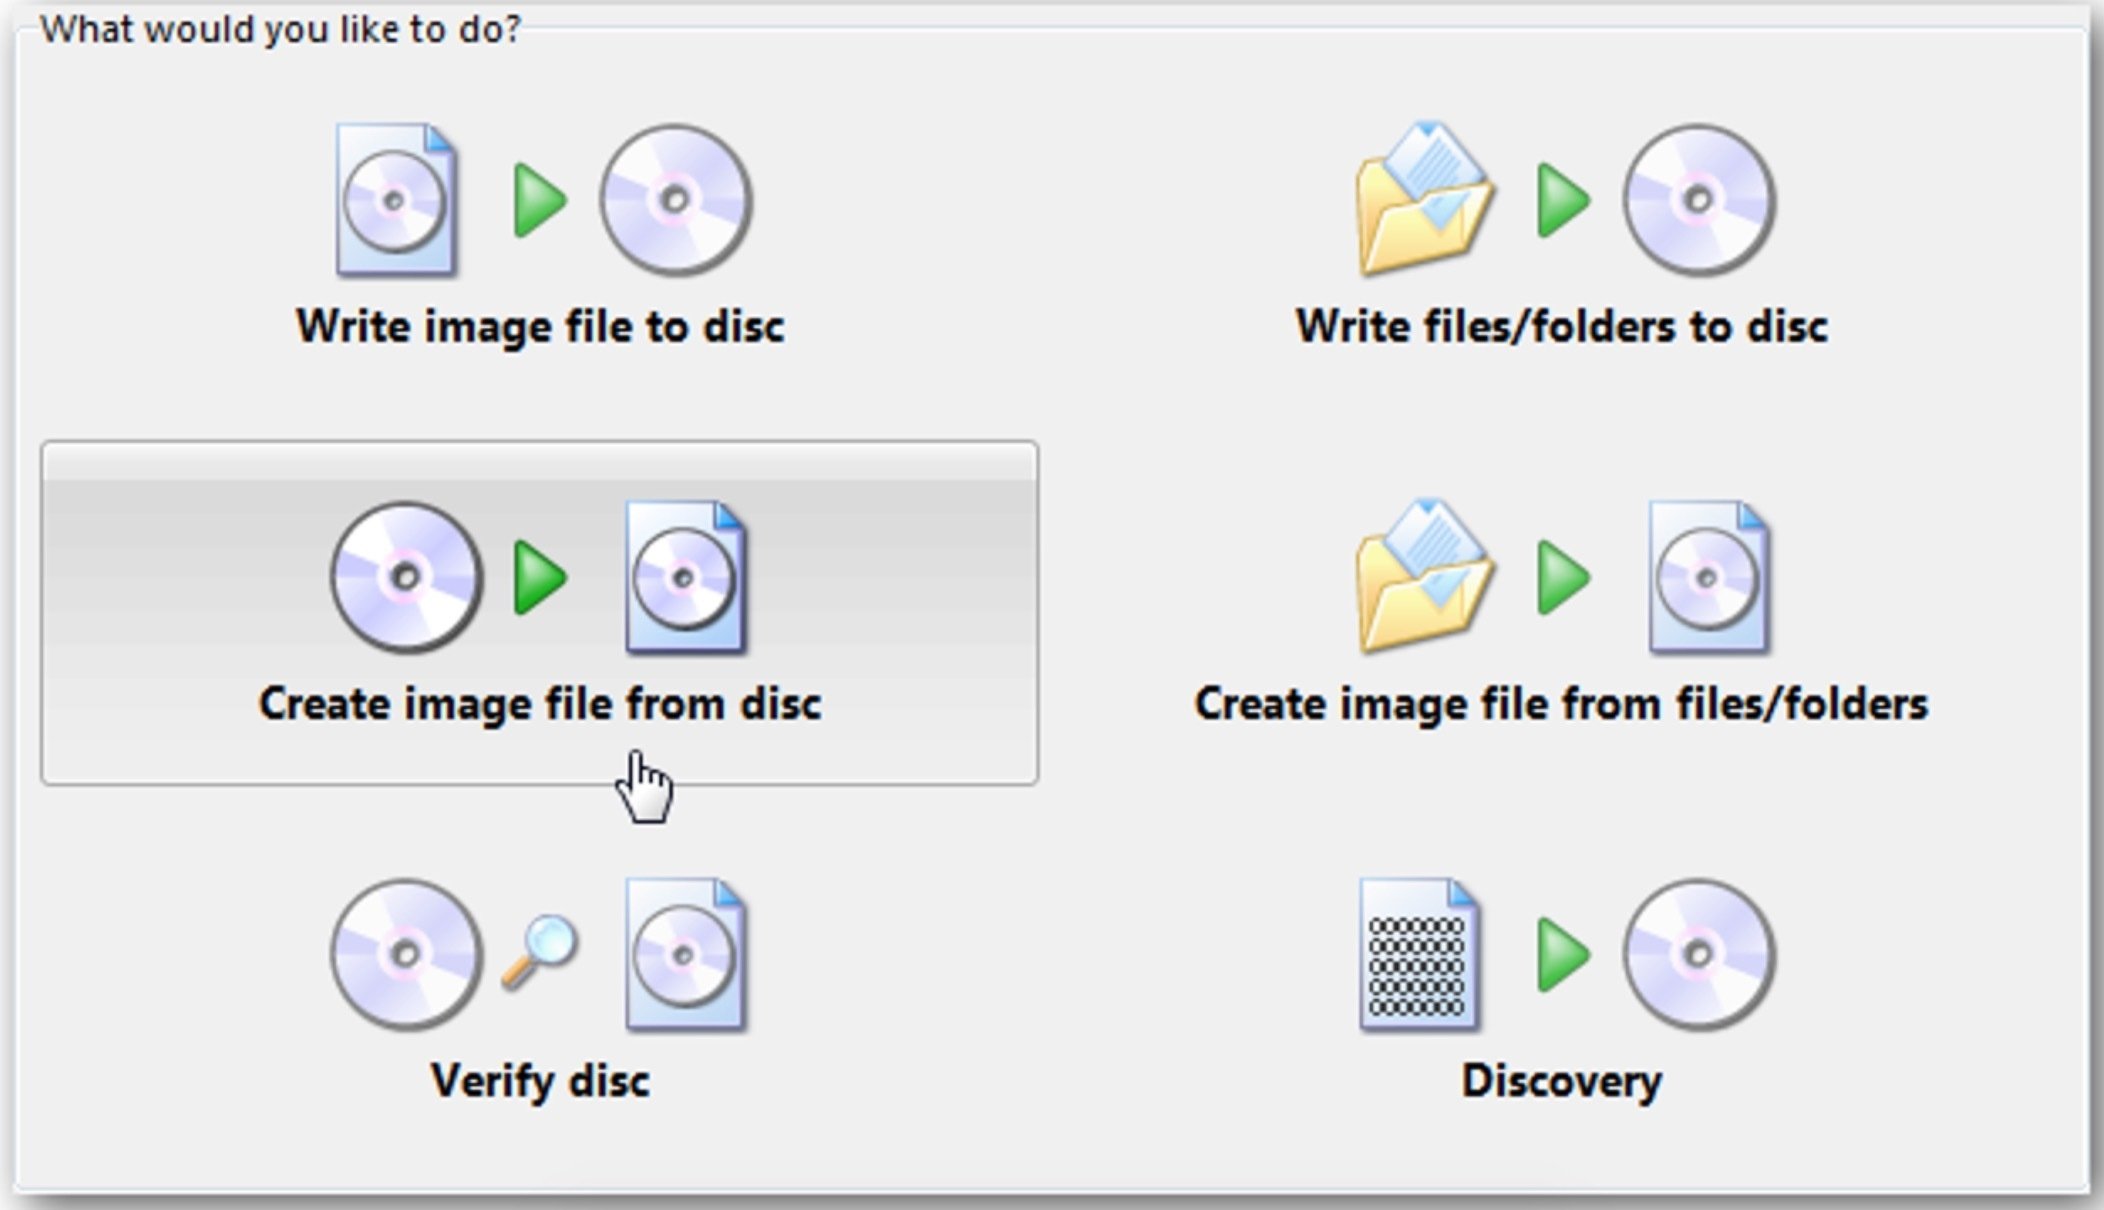 After your PC has detected the CD, click on “Create image file from disc.'